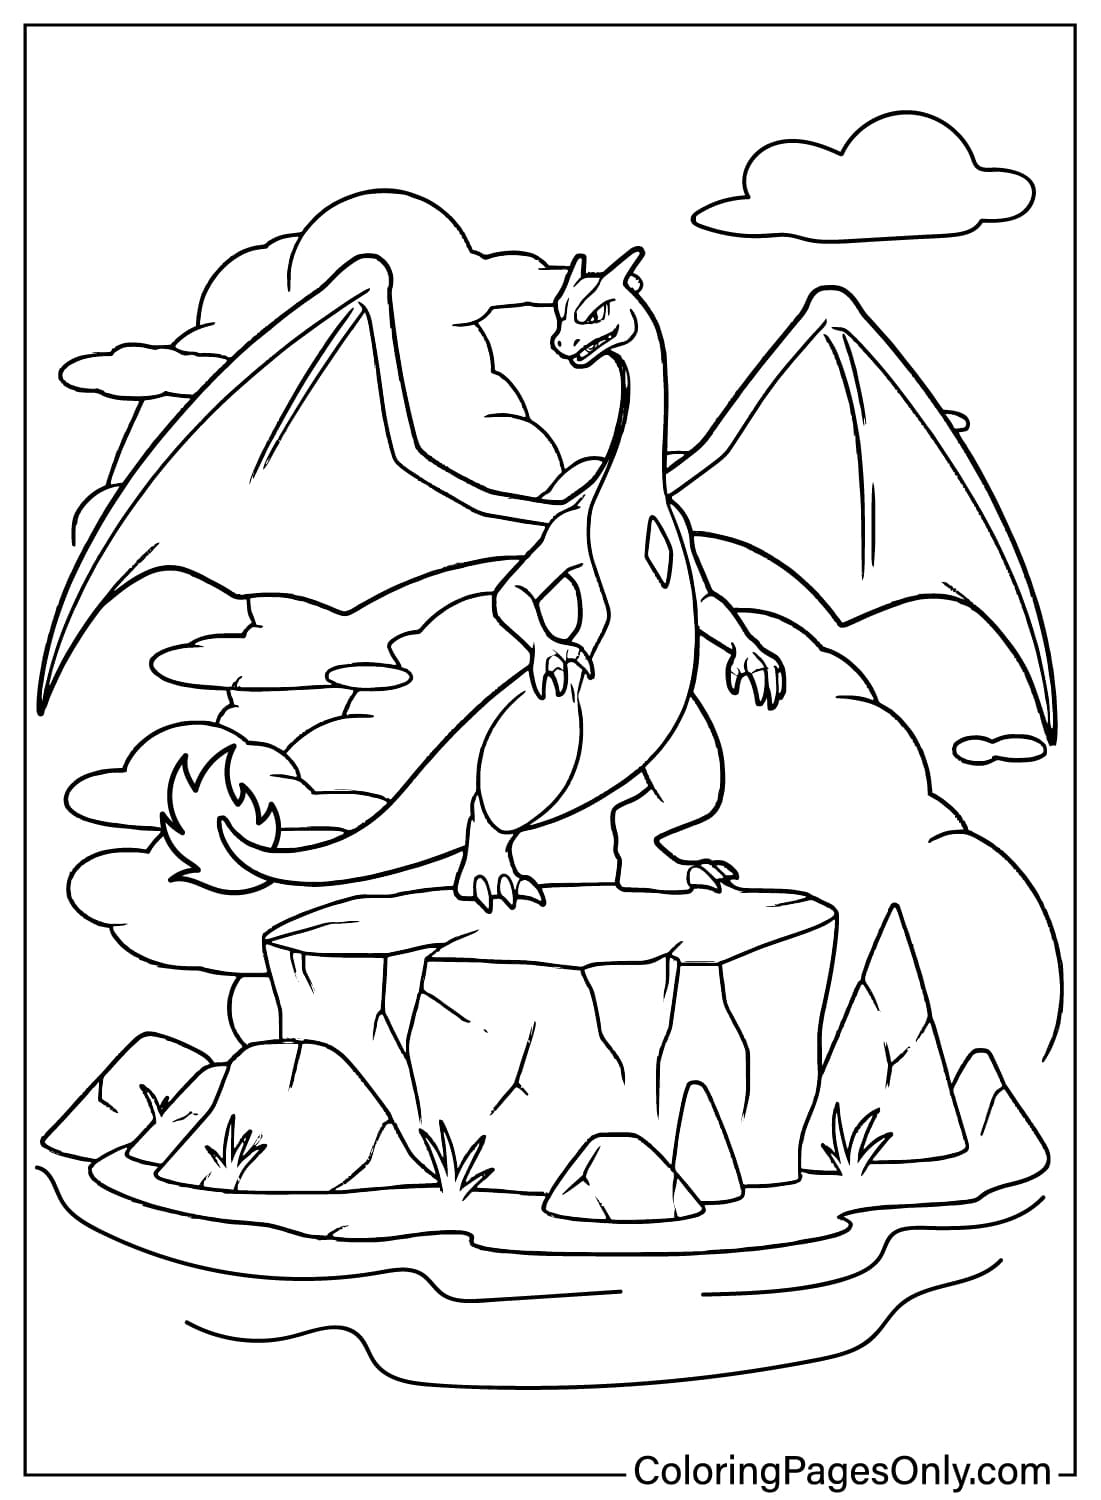 Free Charizard Coloring Page